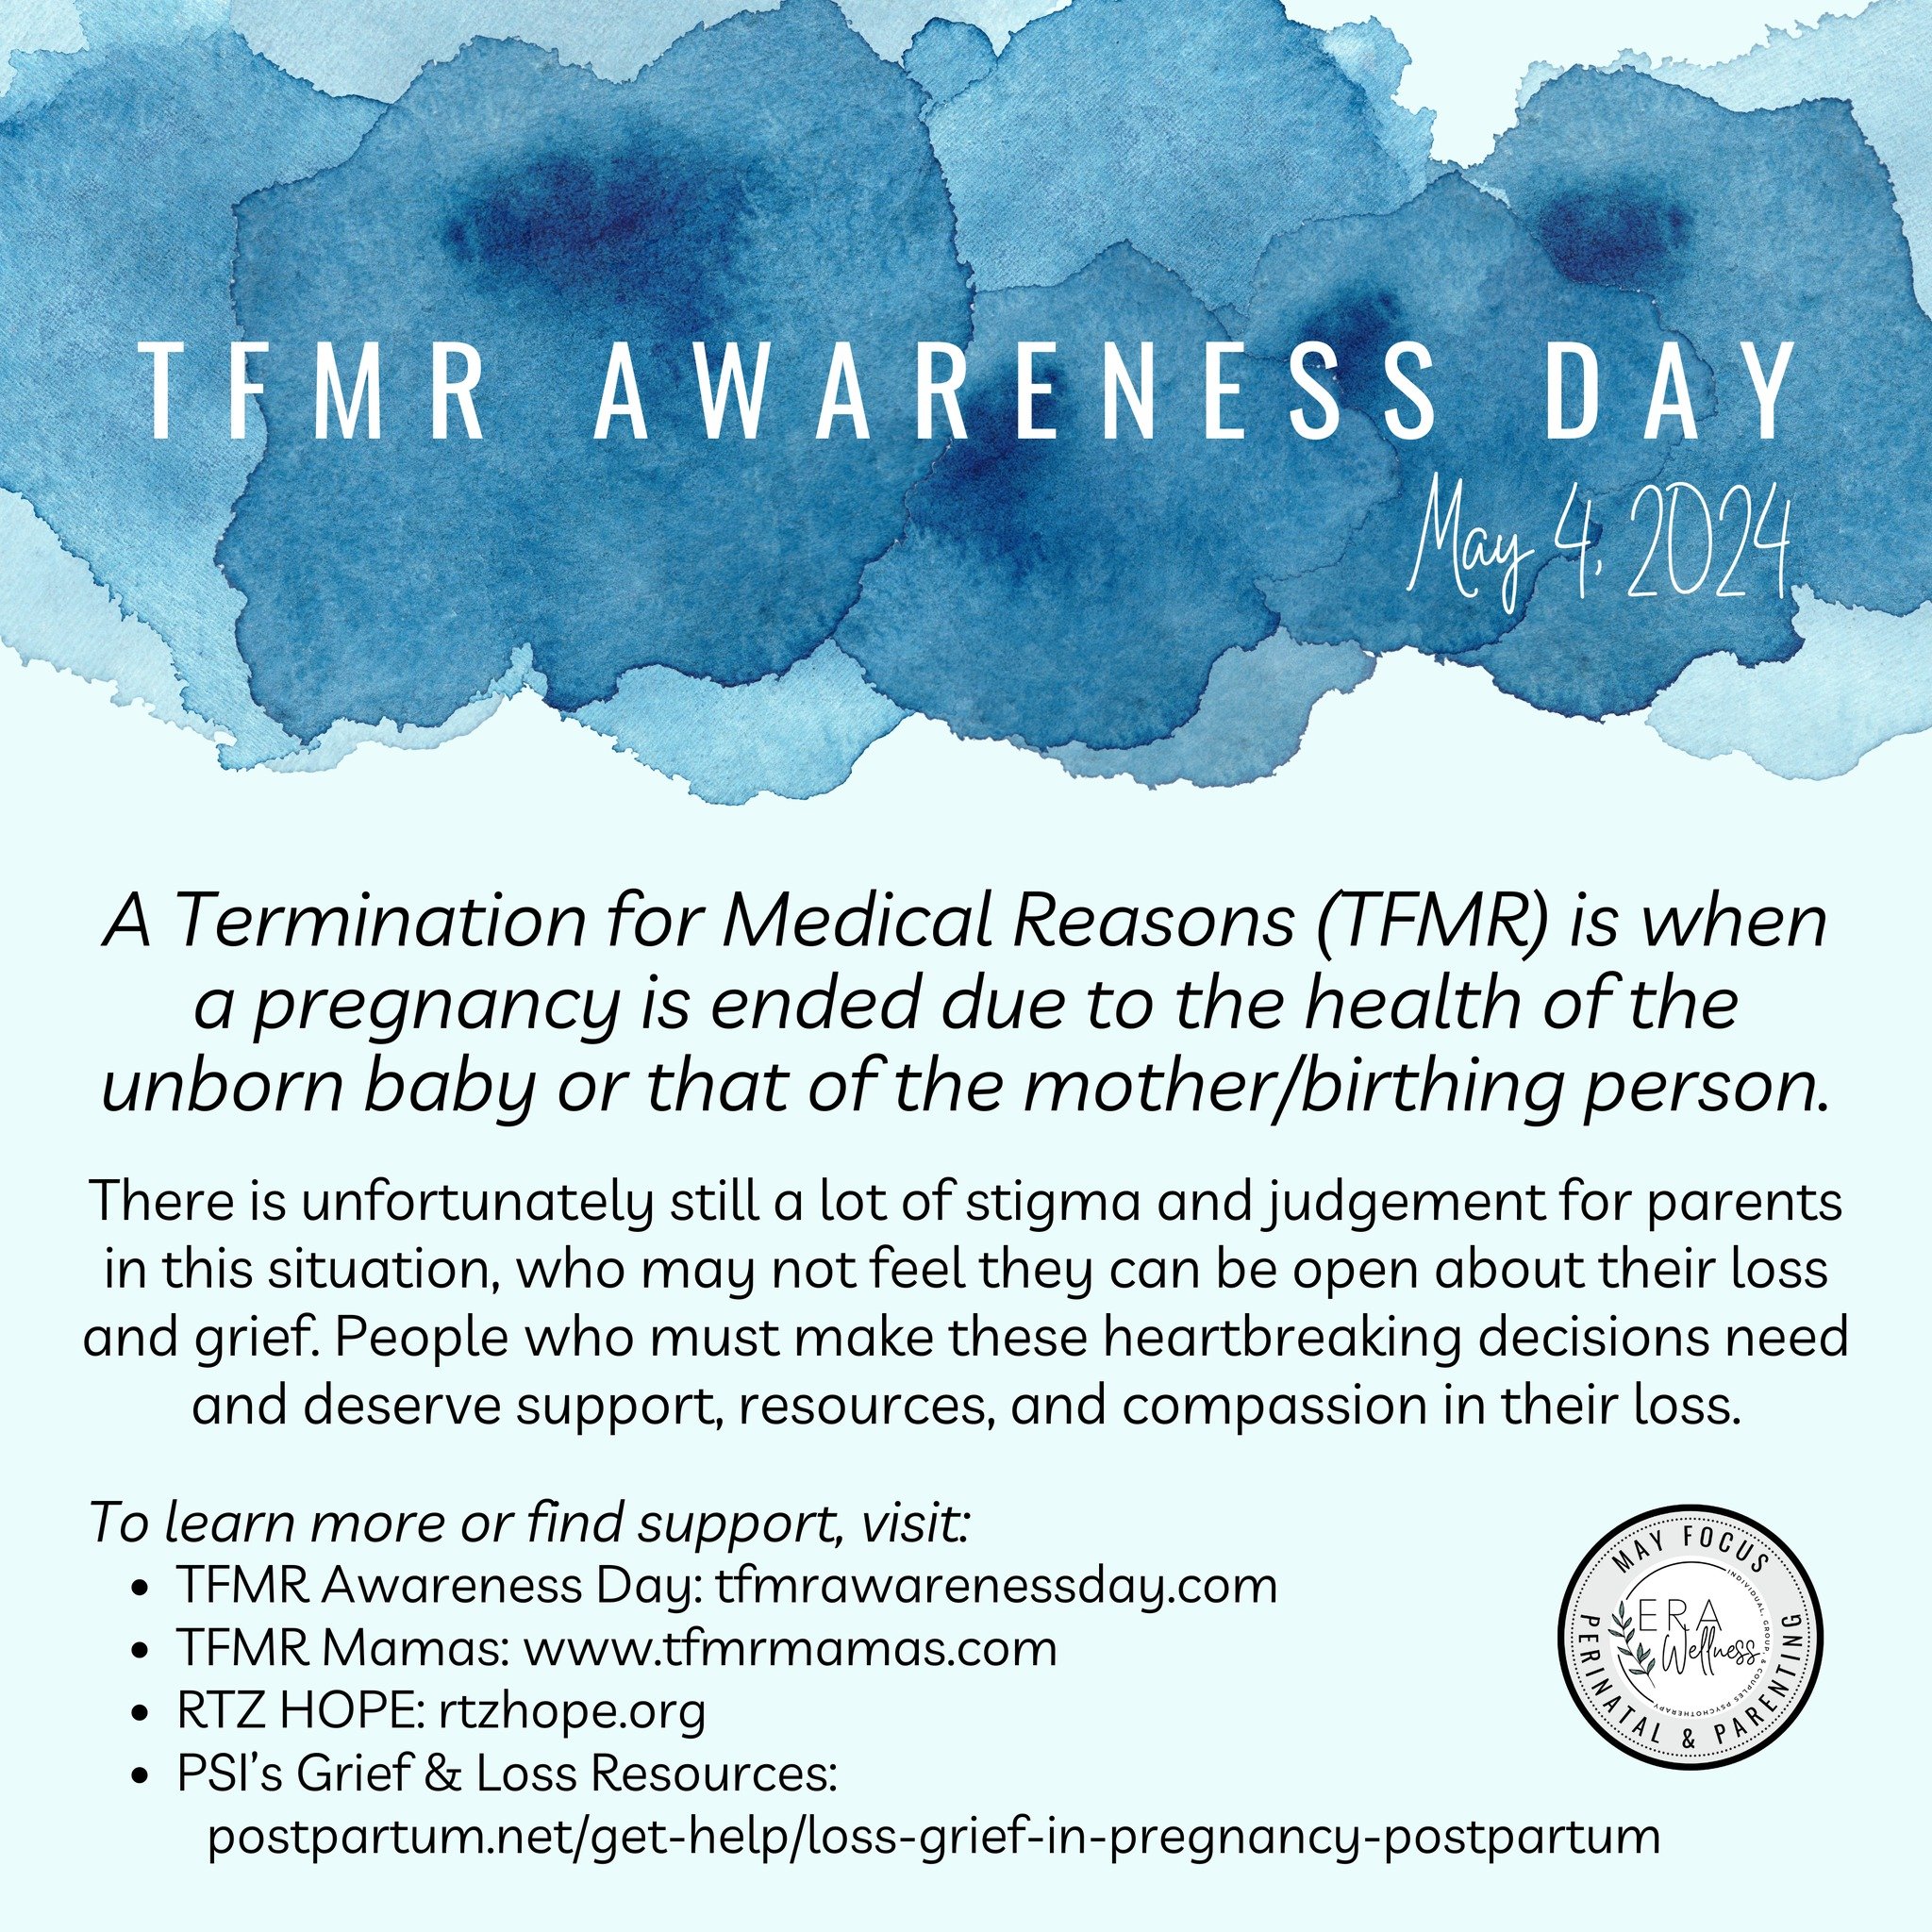 TFMR (Termination for Medical Reasons) Awareness Day is today, May 4. 
This day recognizes the families that have had to make this impossible decision, and aims to raise awareness and support as well as create safe spaces for these families to grieve